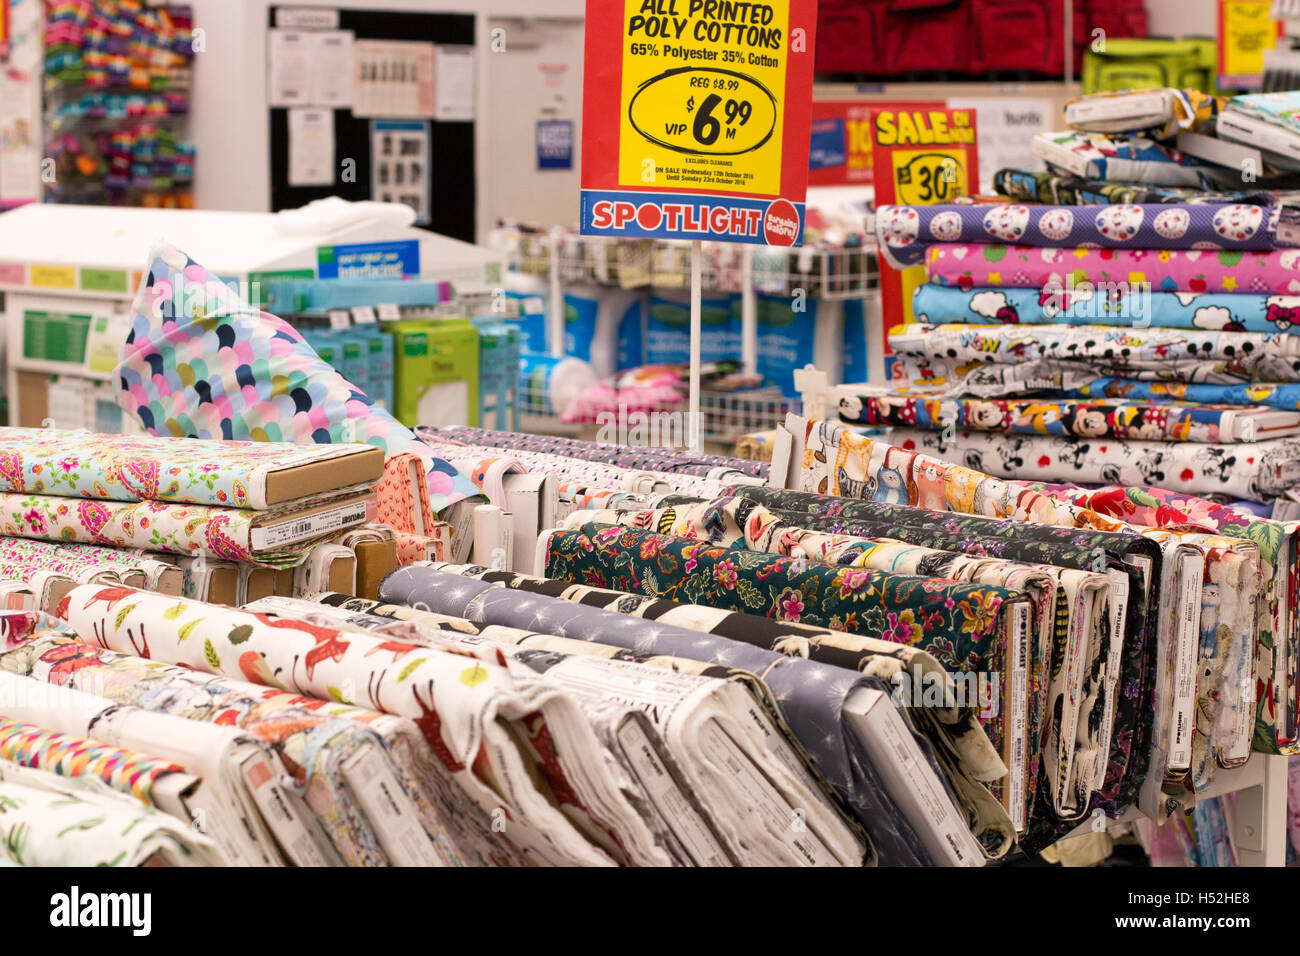 Interior of Spotlight haberdashery store shop selling fabrics and other  sewing essentials, Sydney,Australia Stock Photo - Alamy